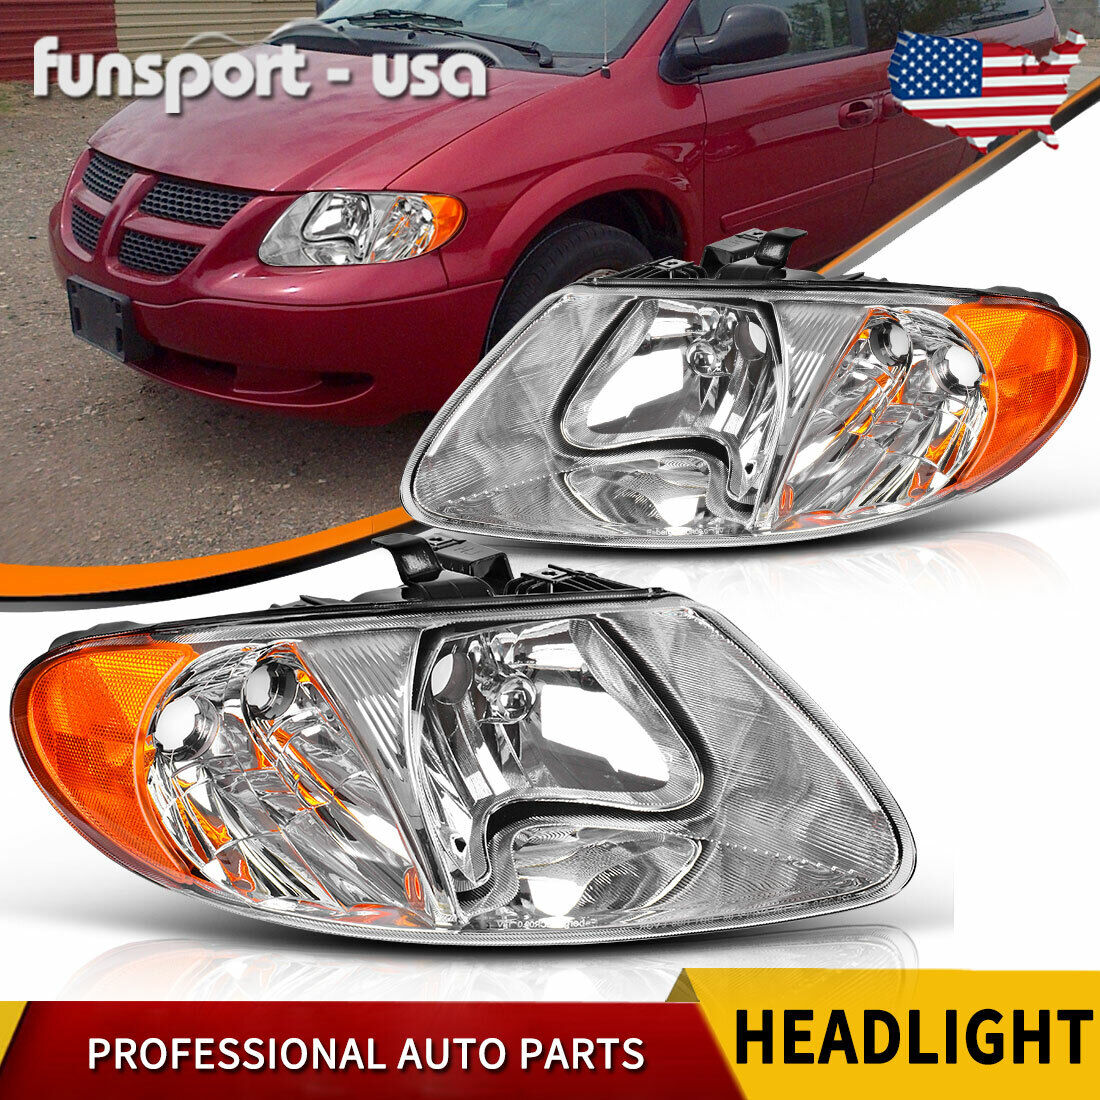 Front Headlights Headlamps for 01-07 Dodge Caravan Town & Country 01-03 Voyager